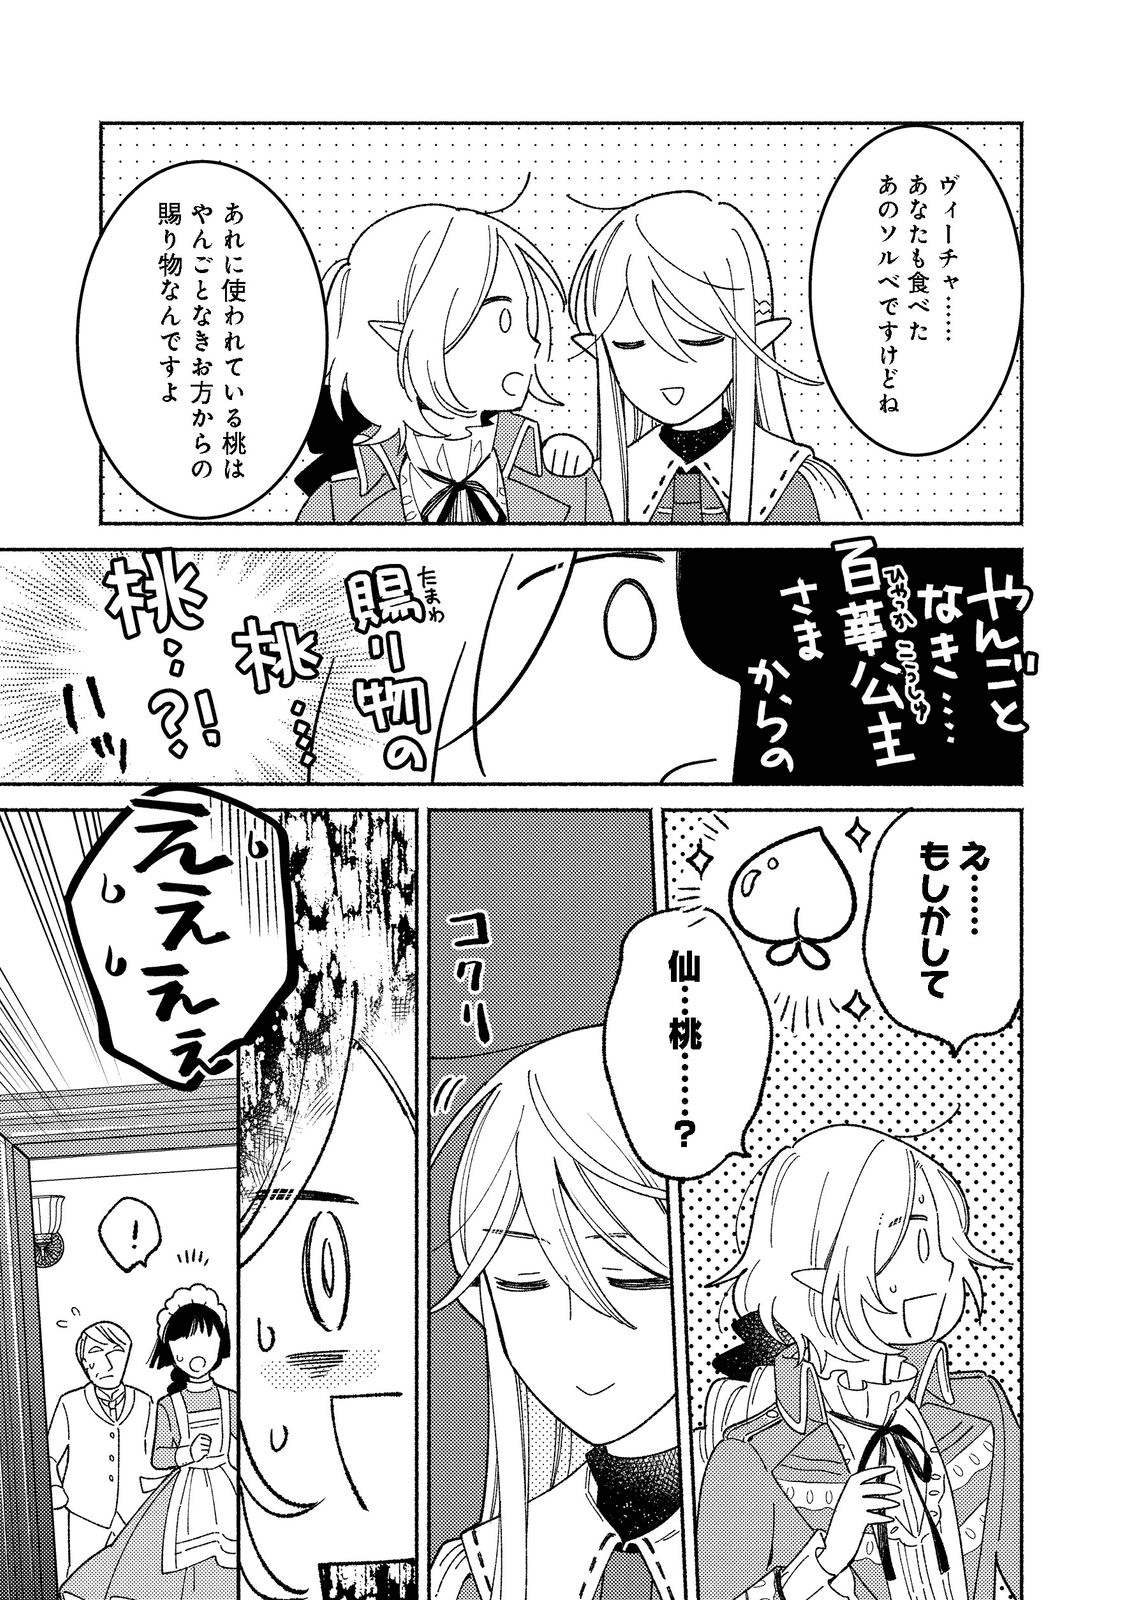 I’m the White Pig Nobleman 第15.2話 - Page 3